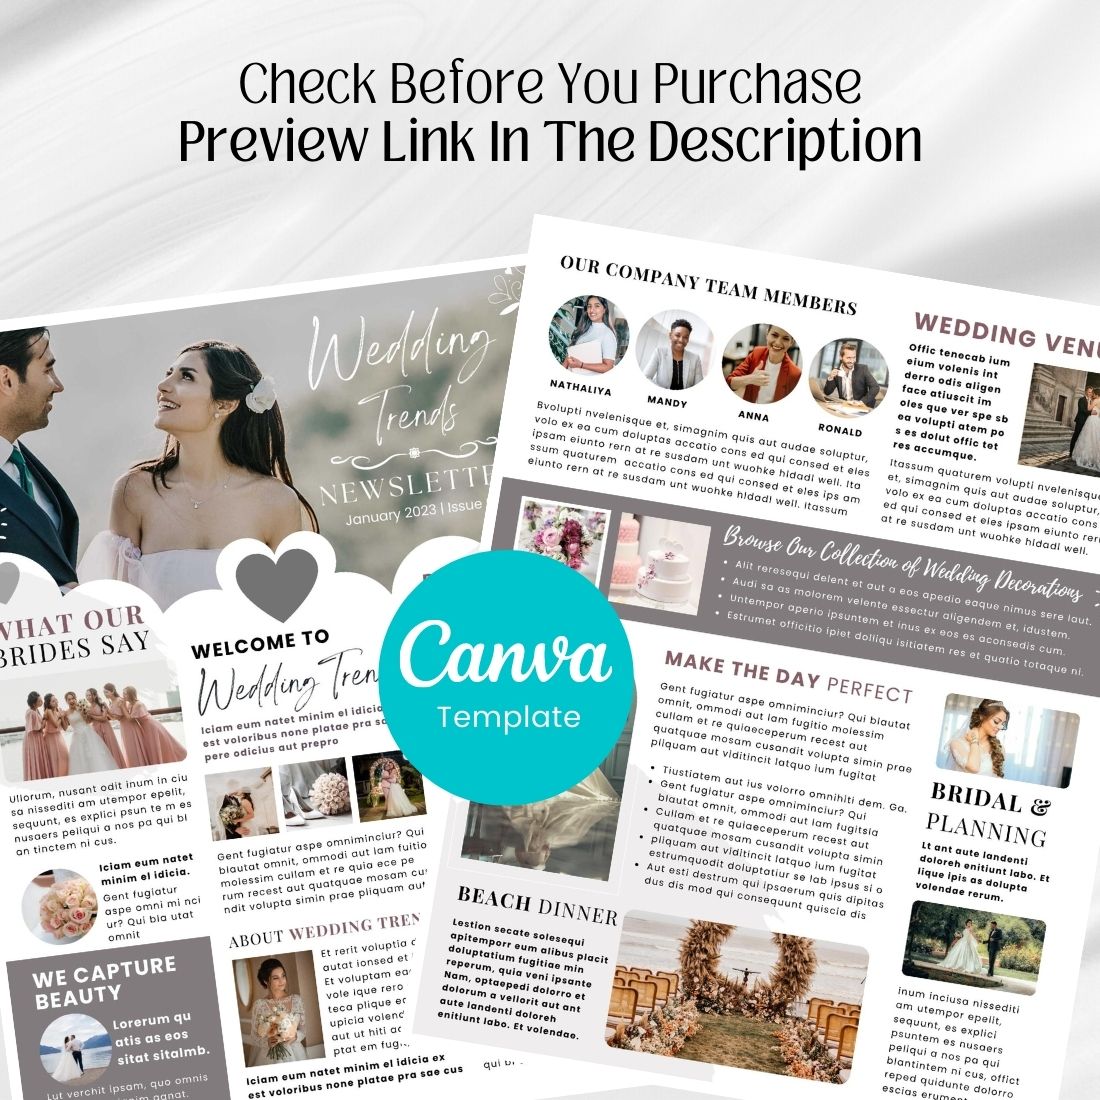 Wedding Newsletter Canva Template cover image.